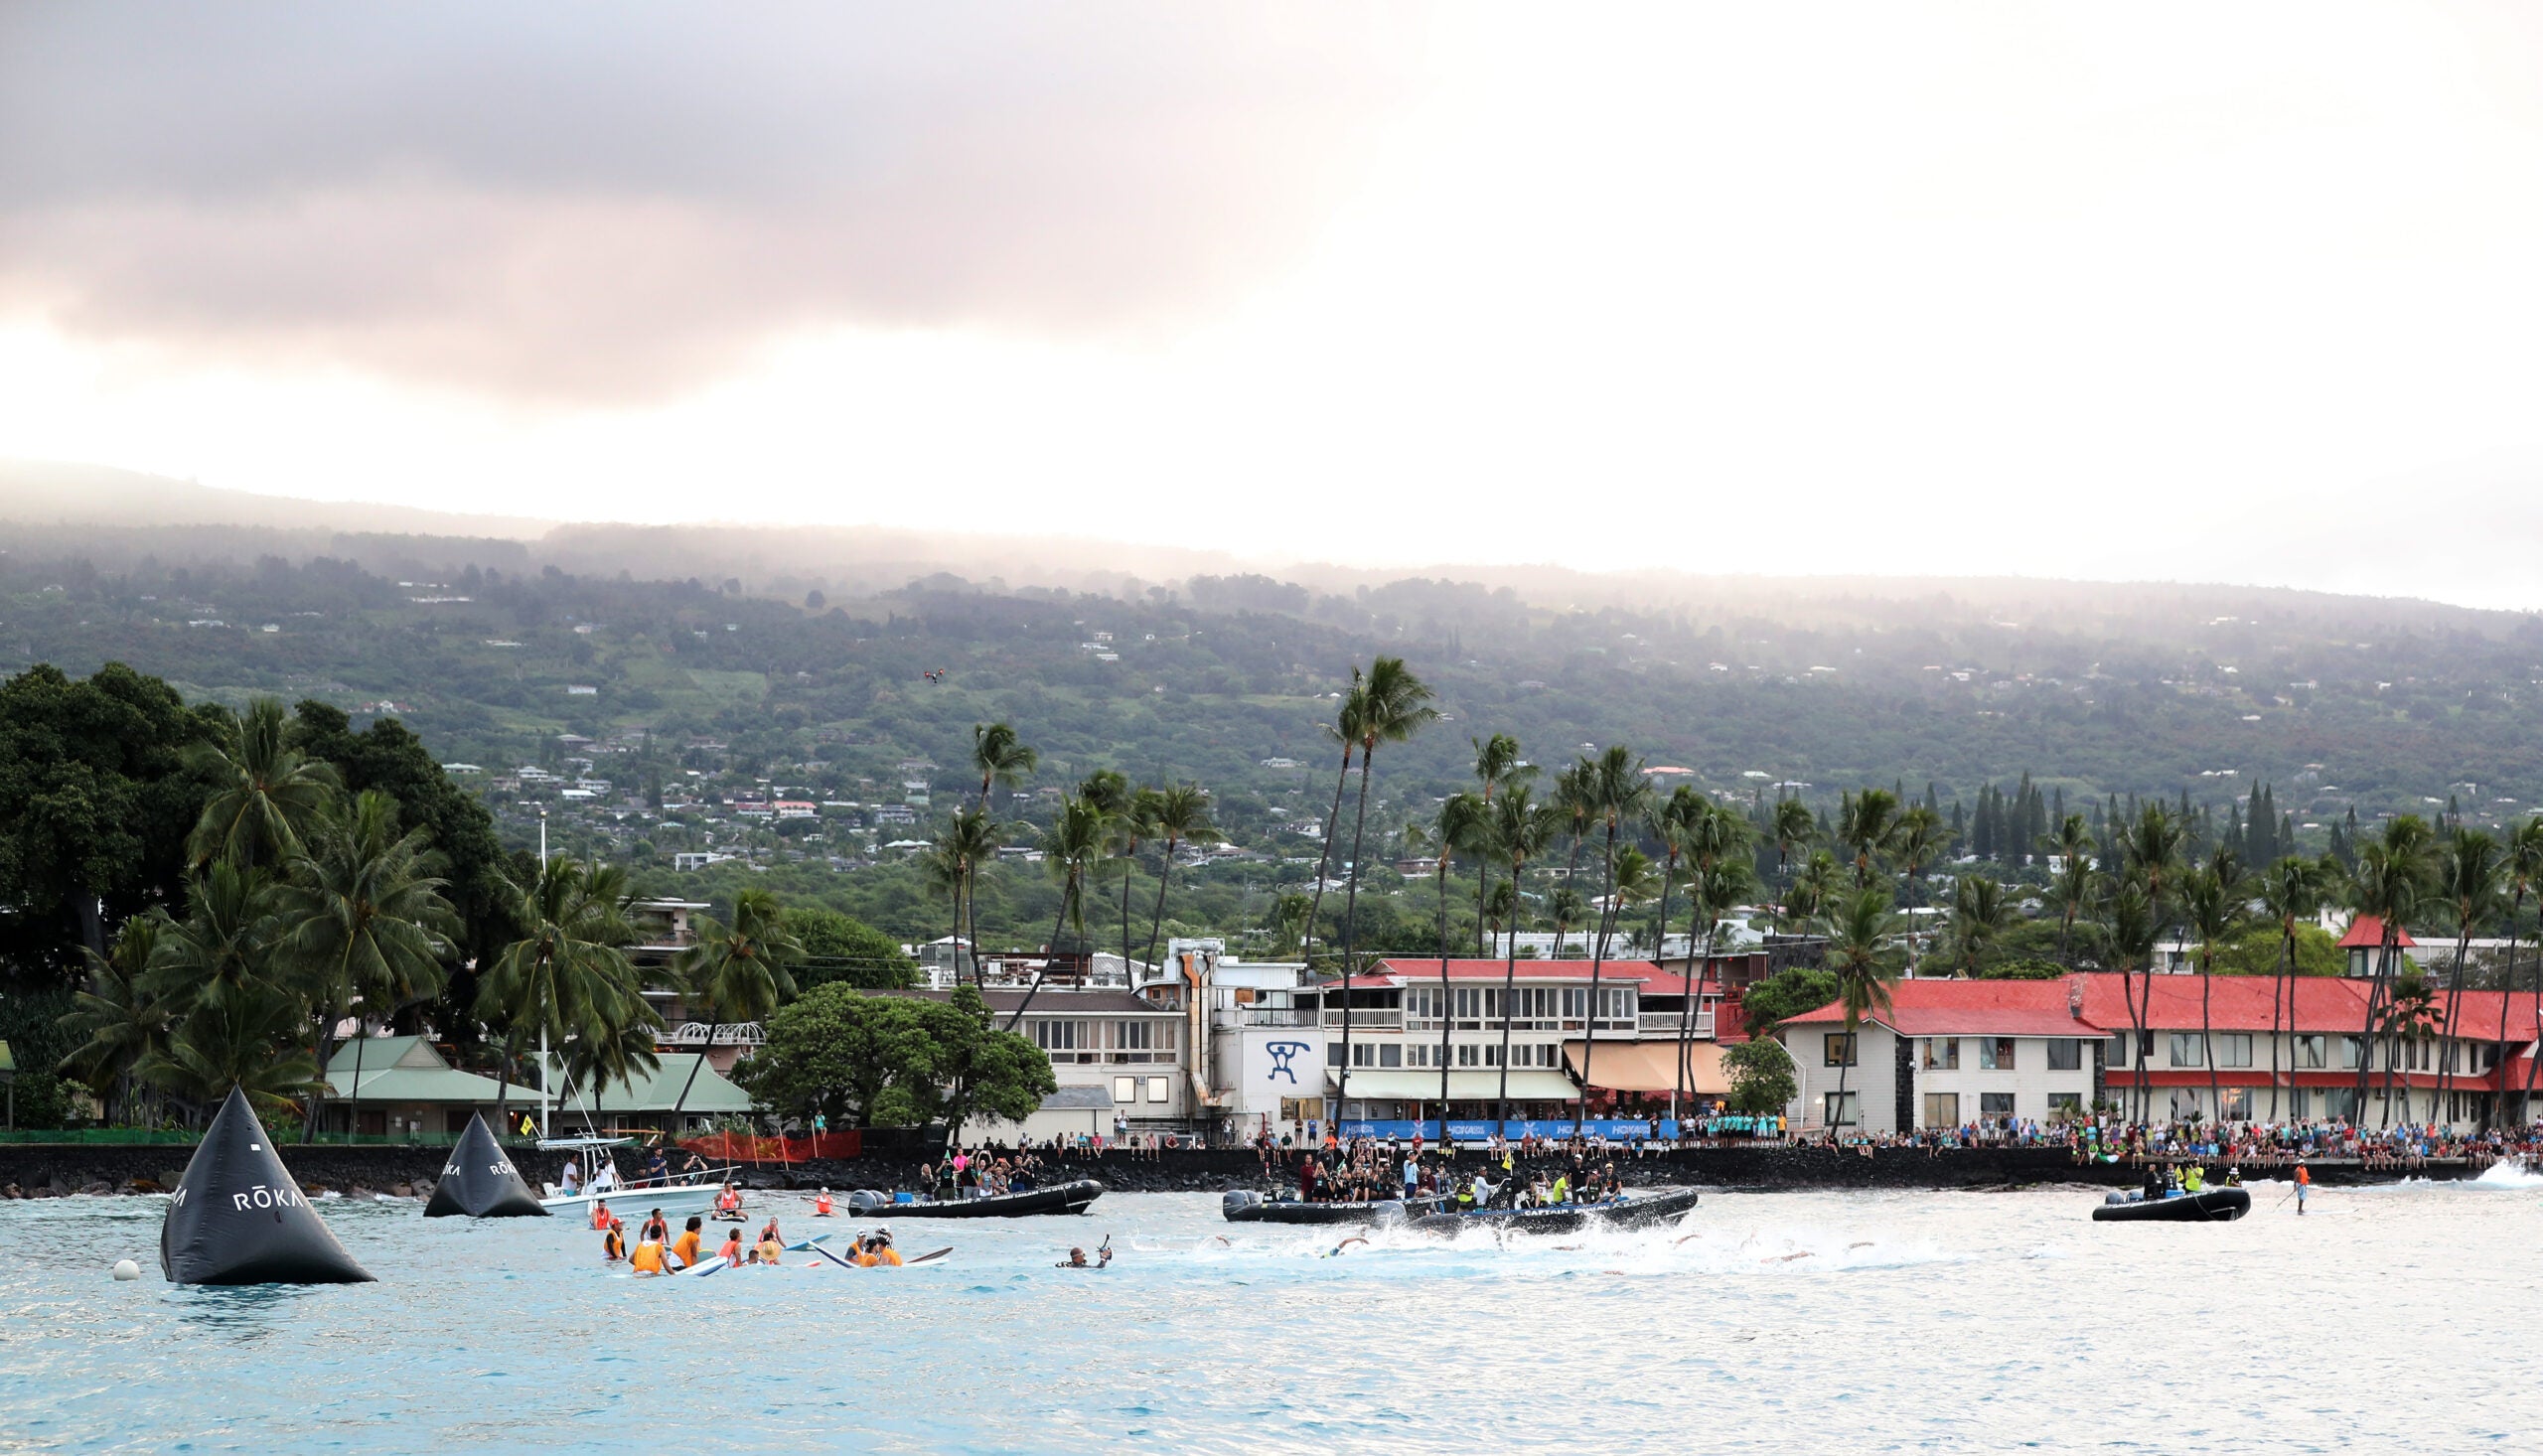 An Insider’s Guide to the Ironman World Championship: The Course, The ...